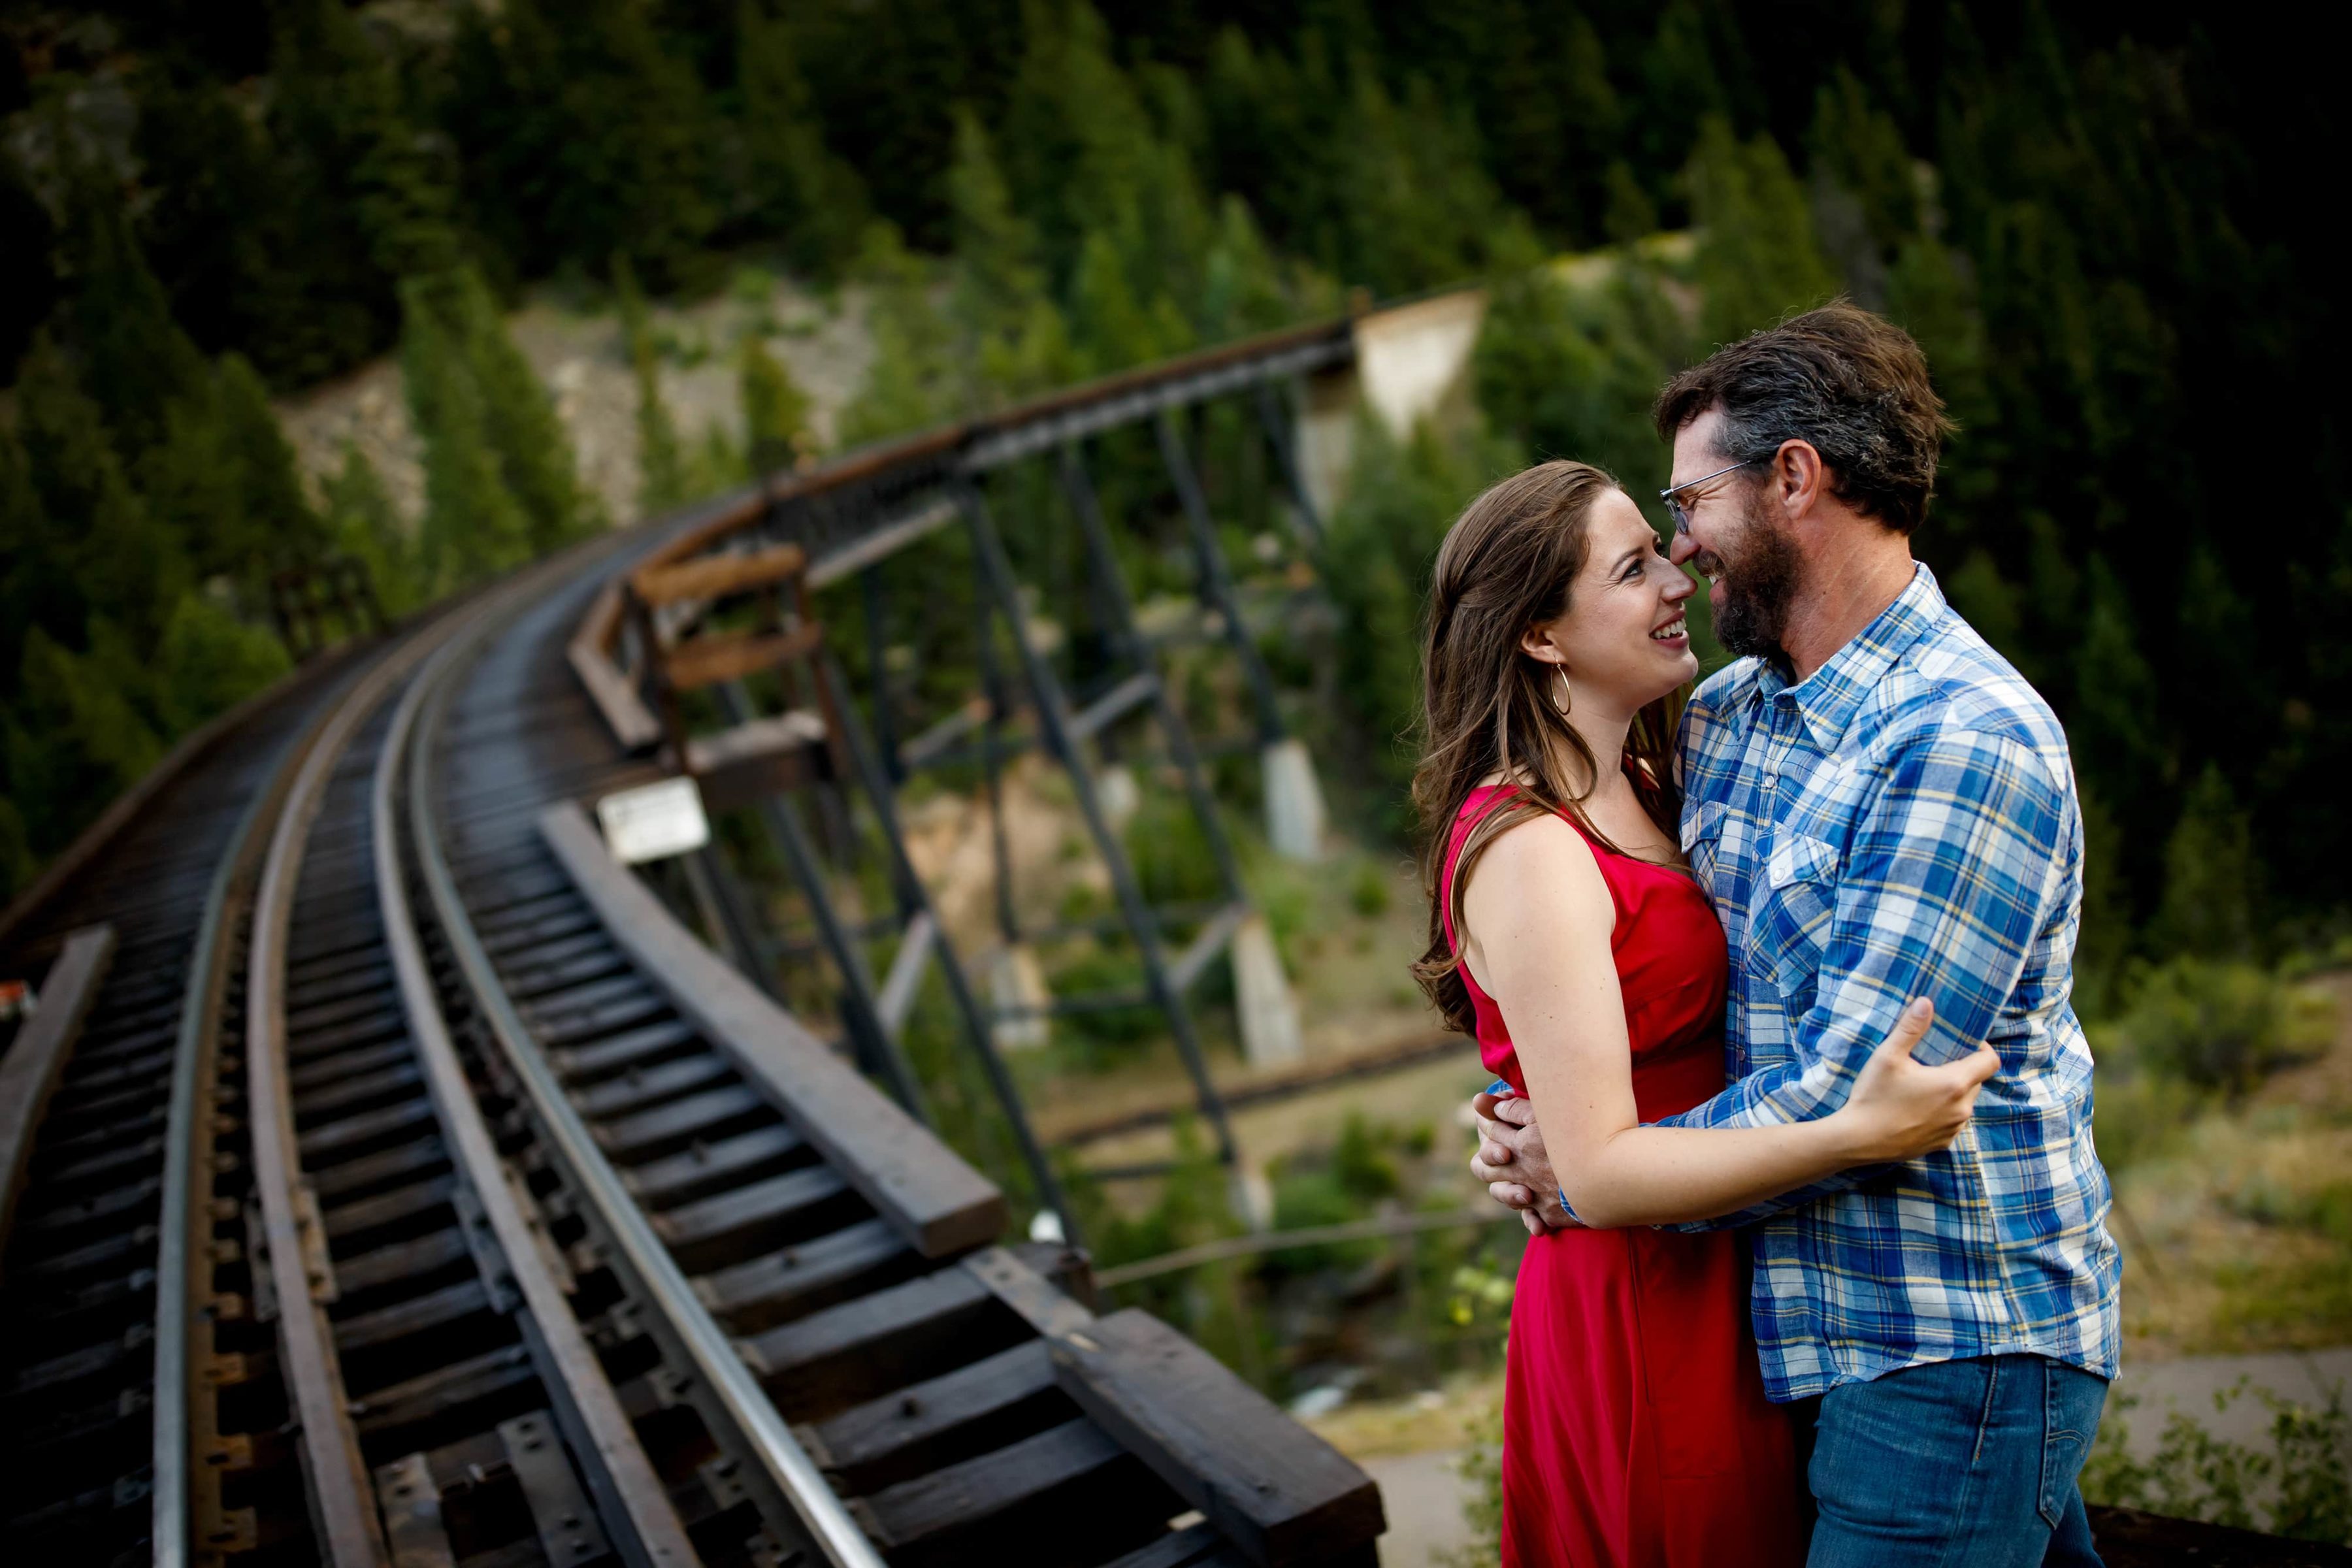 Mallory is embraced by Daniel at the location of his proposal near the train tracks in Georgetown Colorado